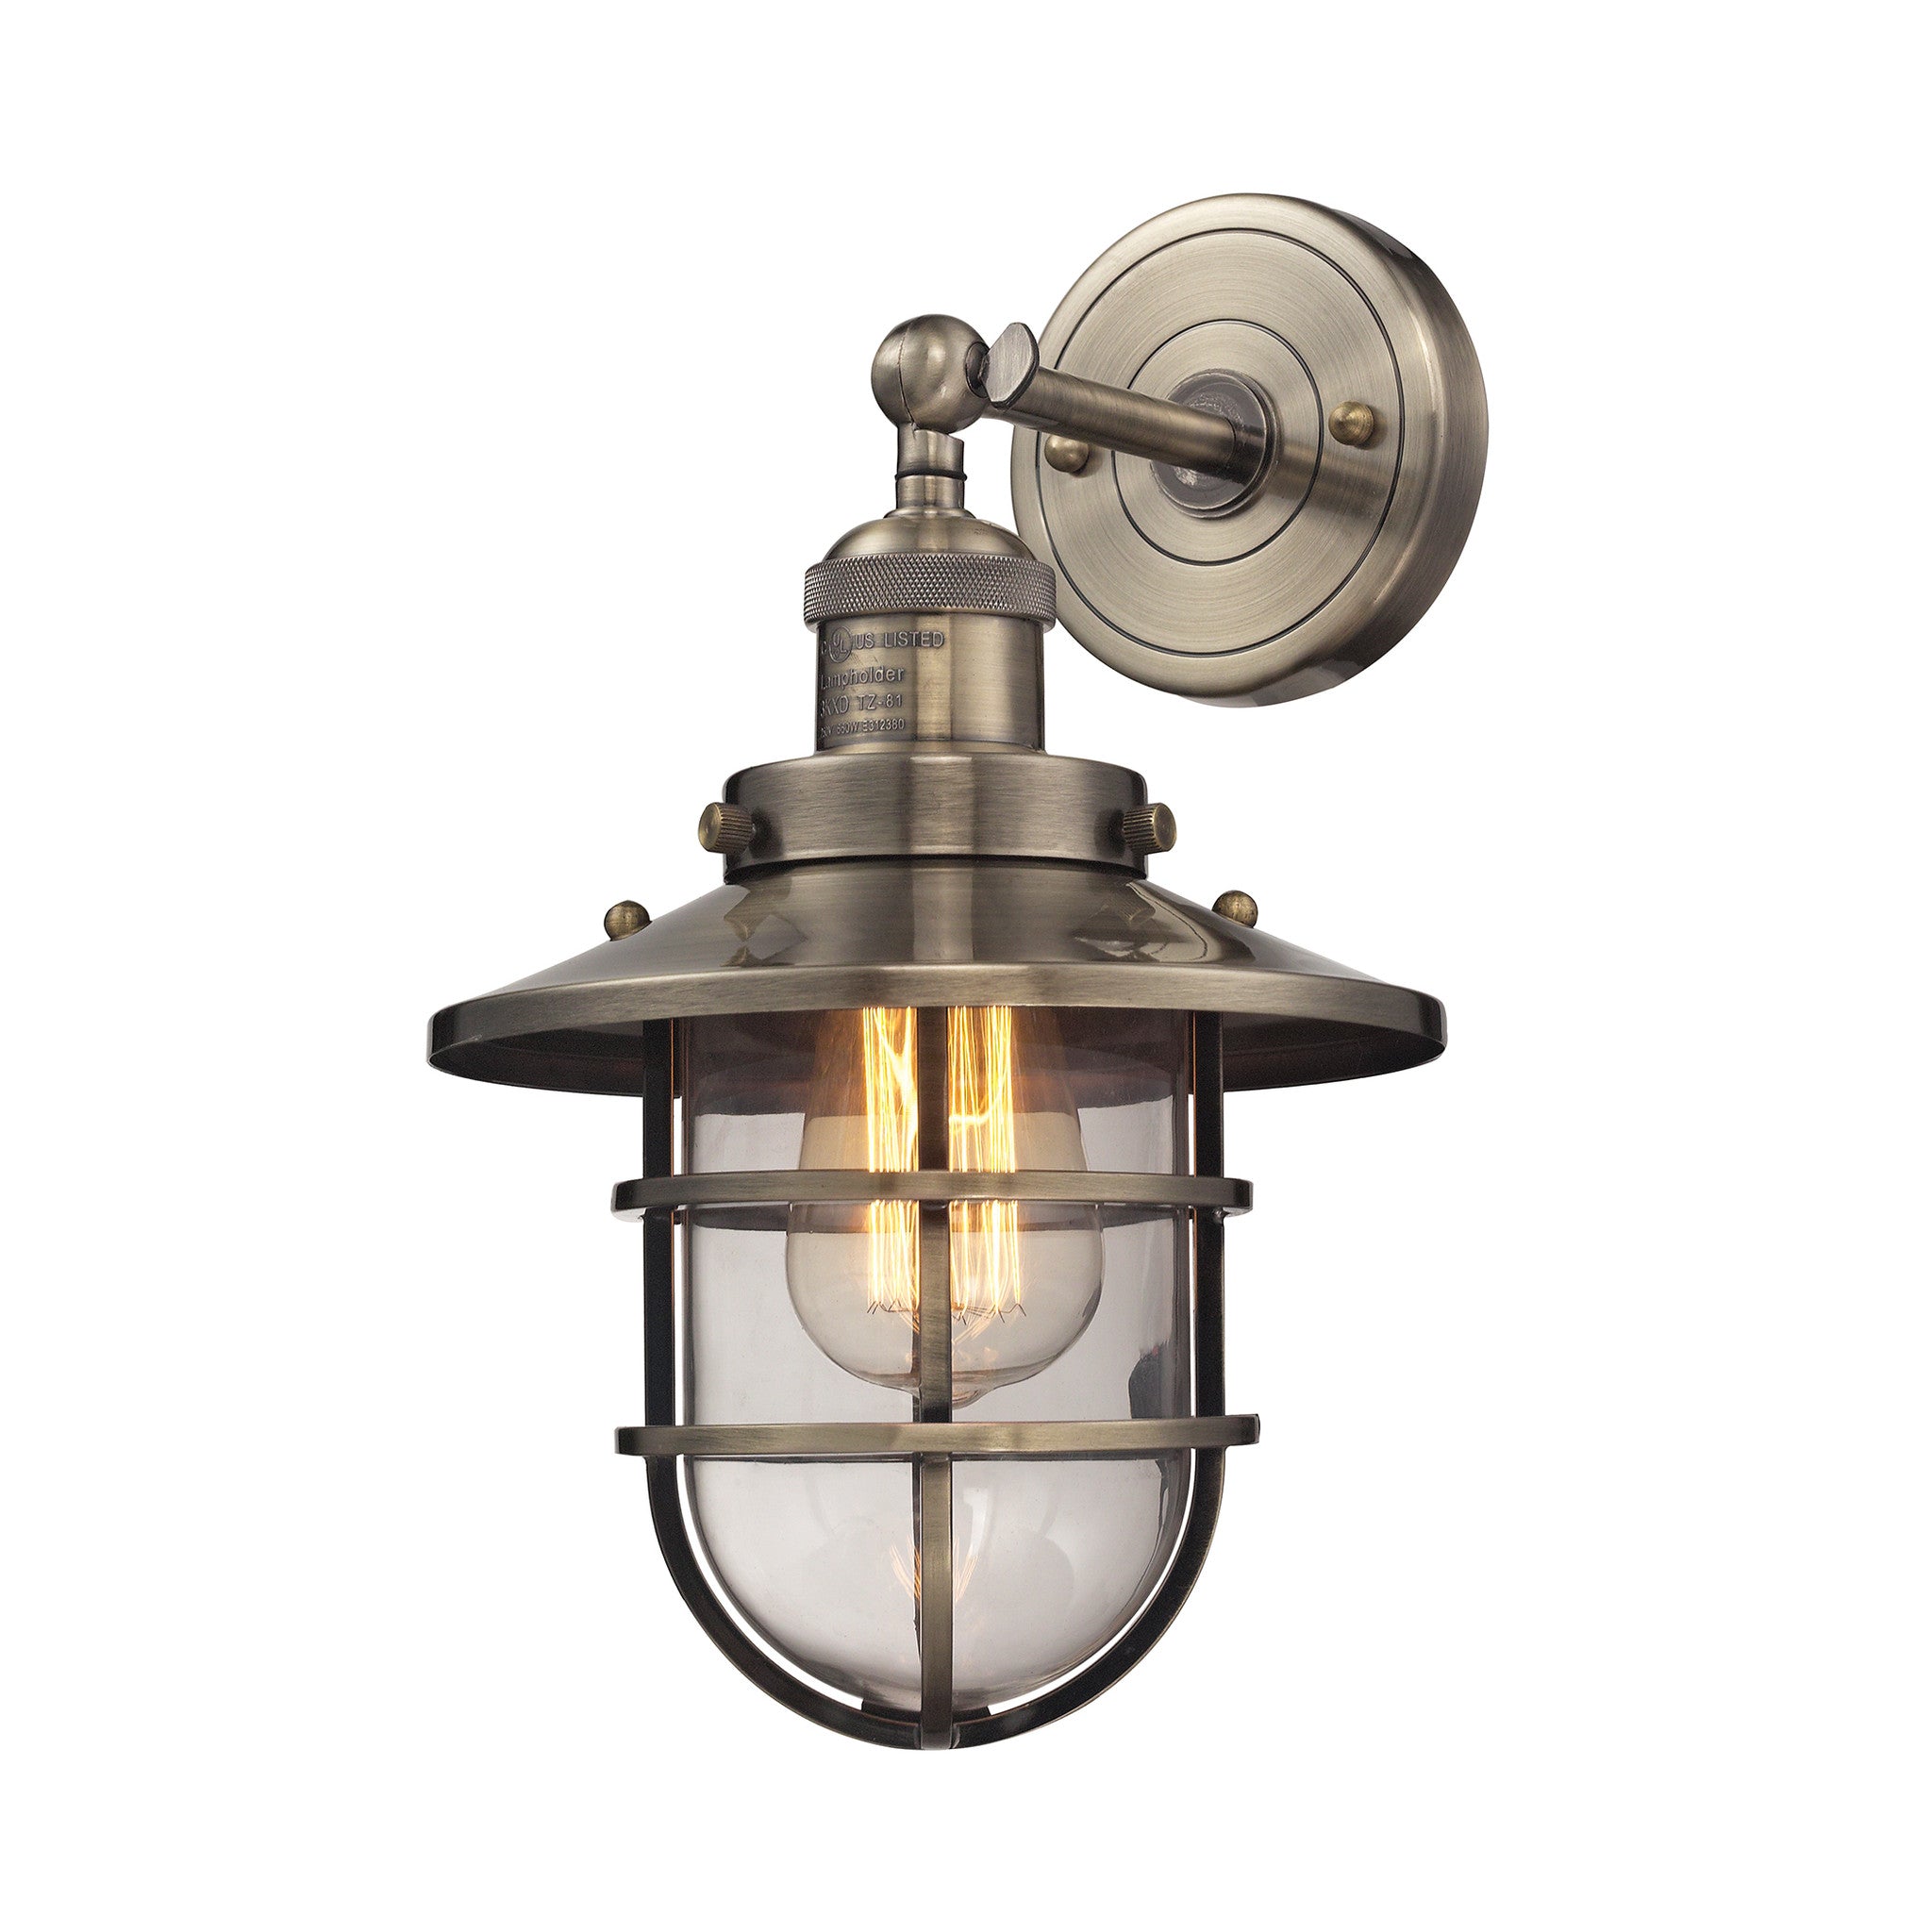 Seaport 1 Light Wall Sconce in Antique Brass by Elk Lighting 66376-1